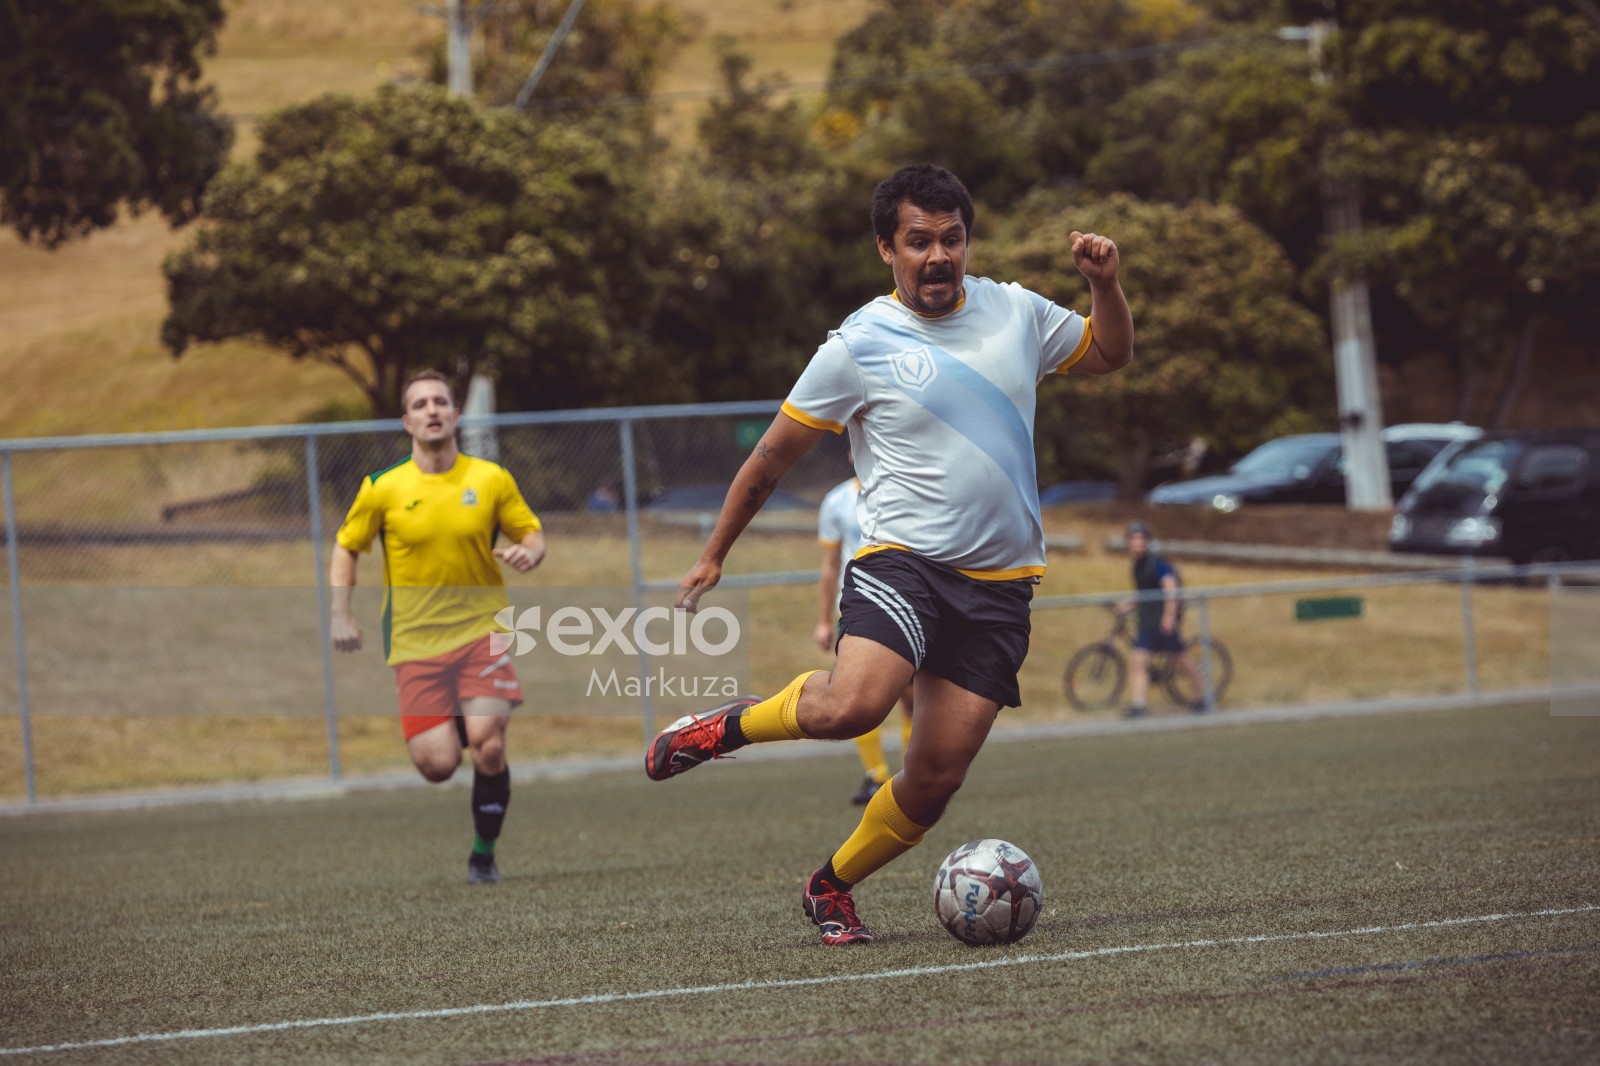 Football player in yellow socks running after ball - Sports Zone sunday league